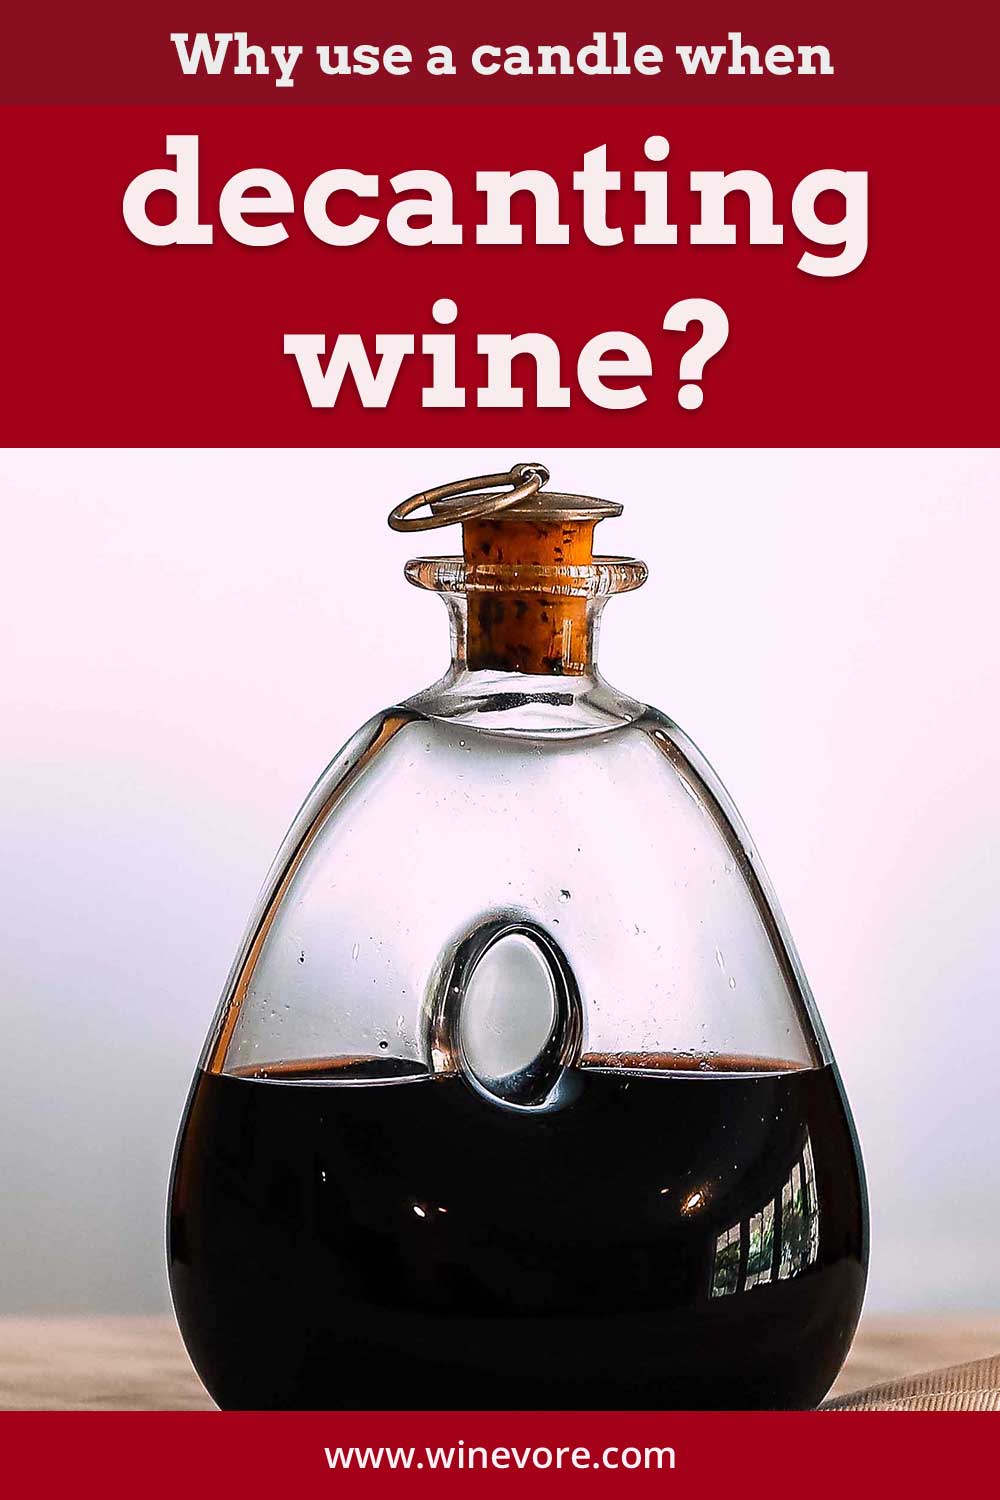 A wine decanter - Why use a candle when decanting wine?